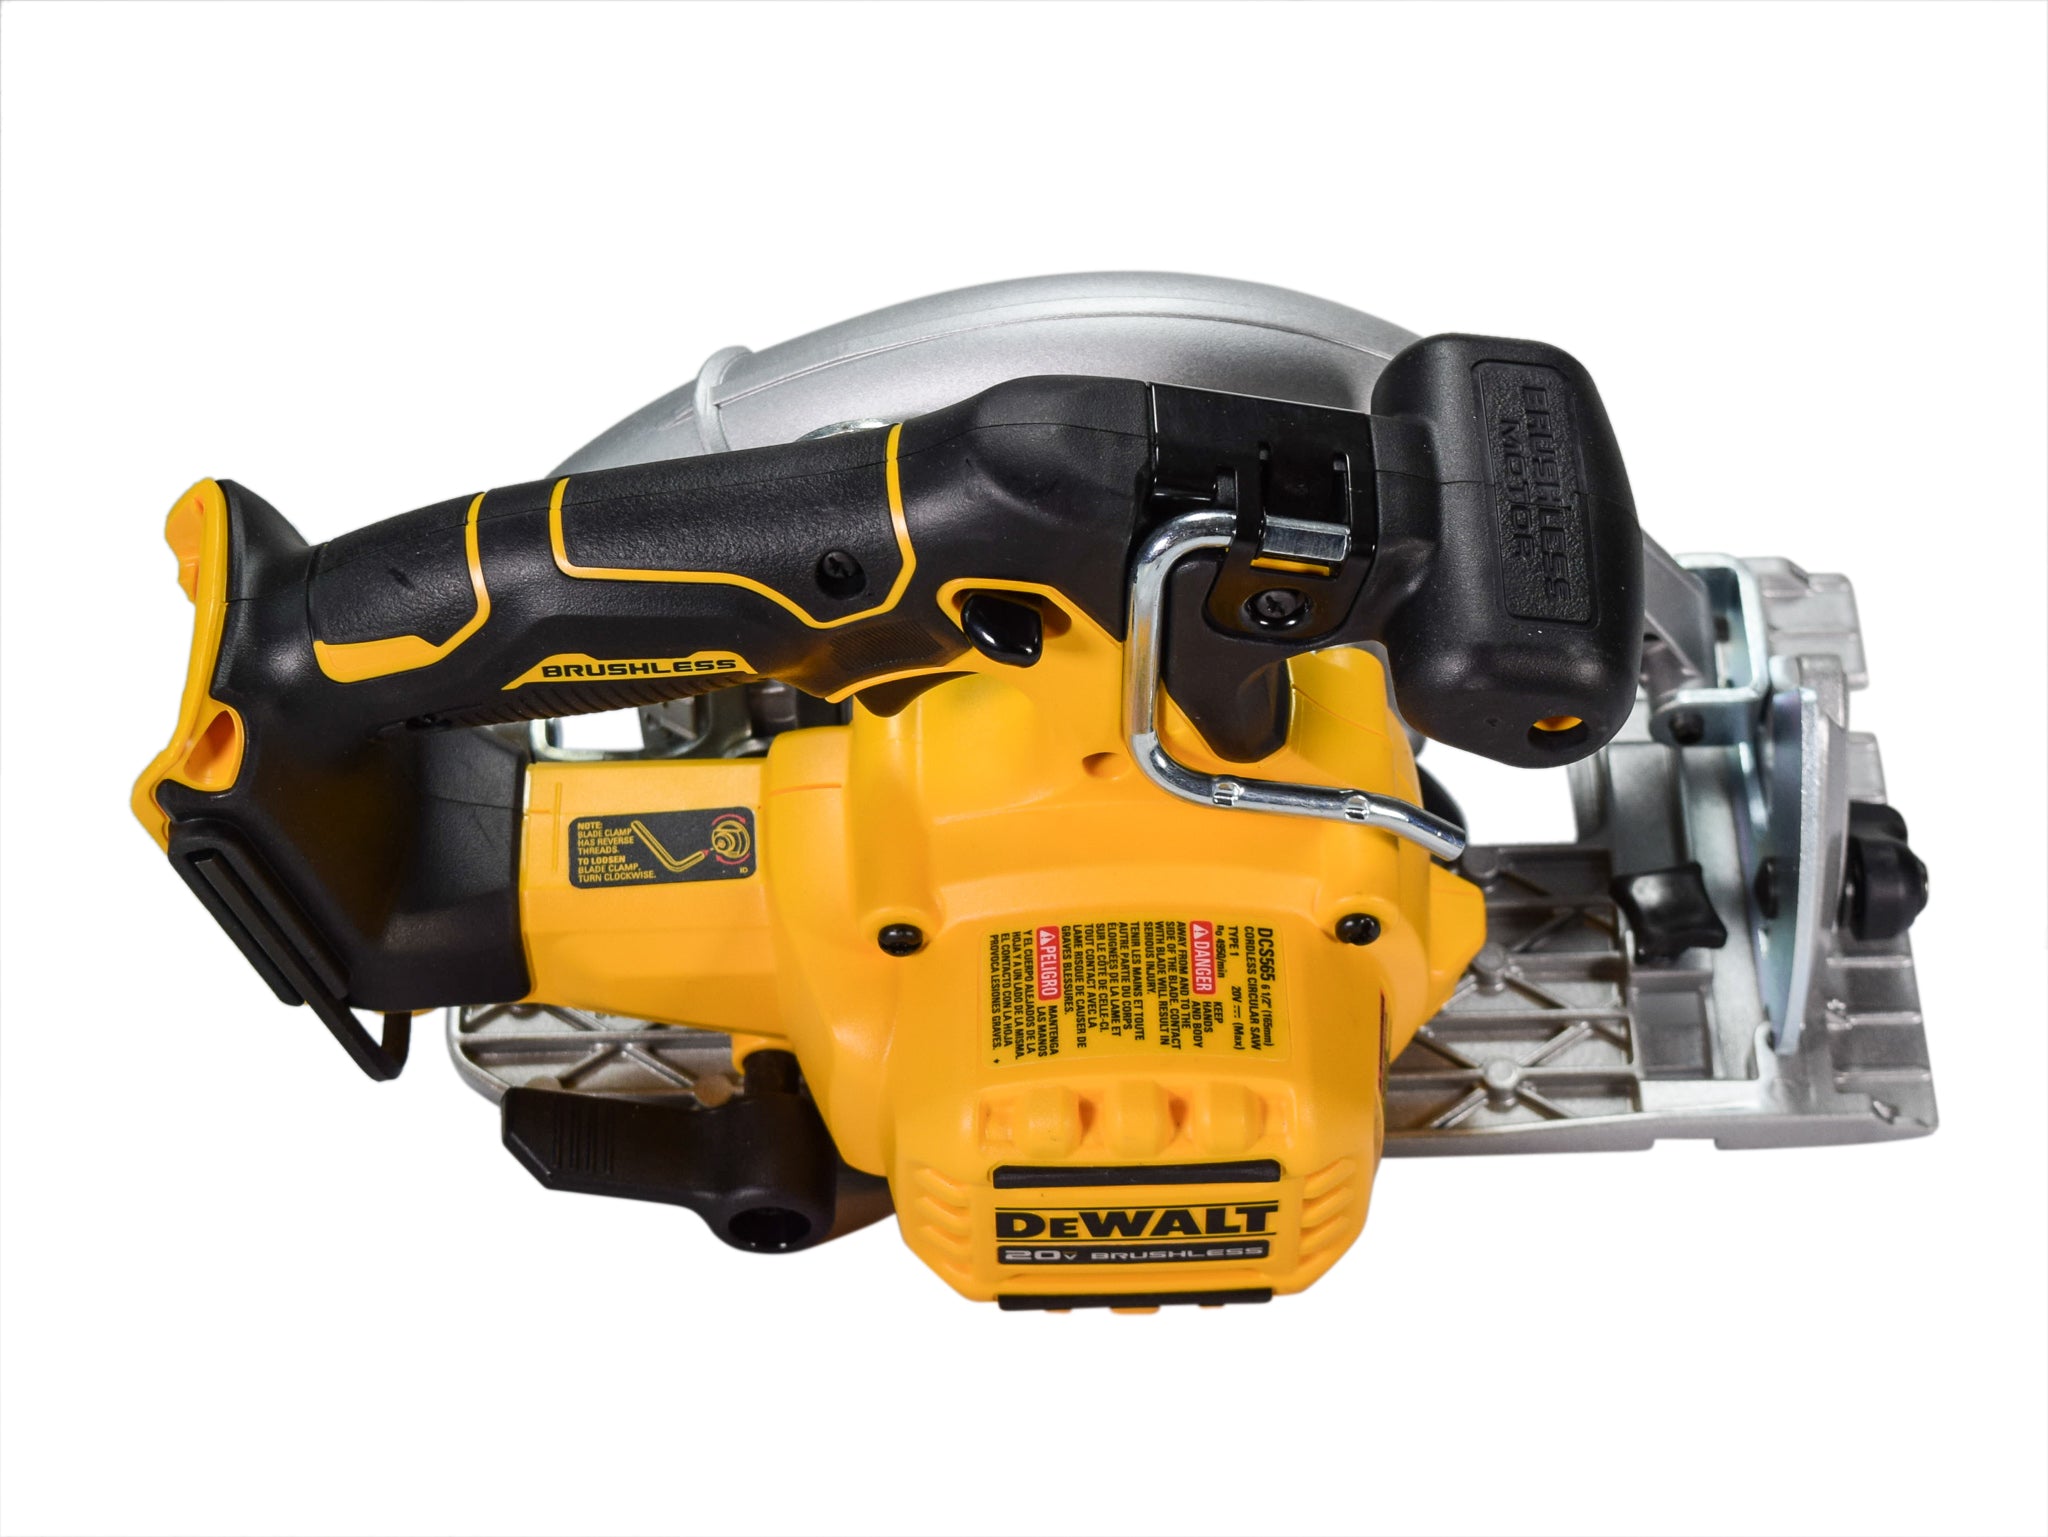 Dewalt DCS565B 20-Volt MAX Cordless Brushless 6-1/2 in. Circular Saw (Tool-Only)